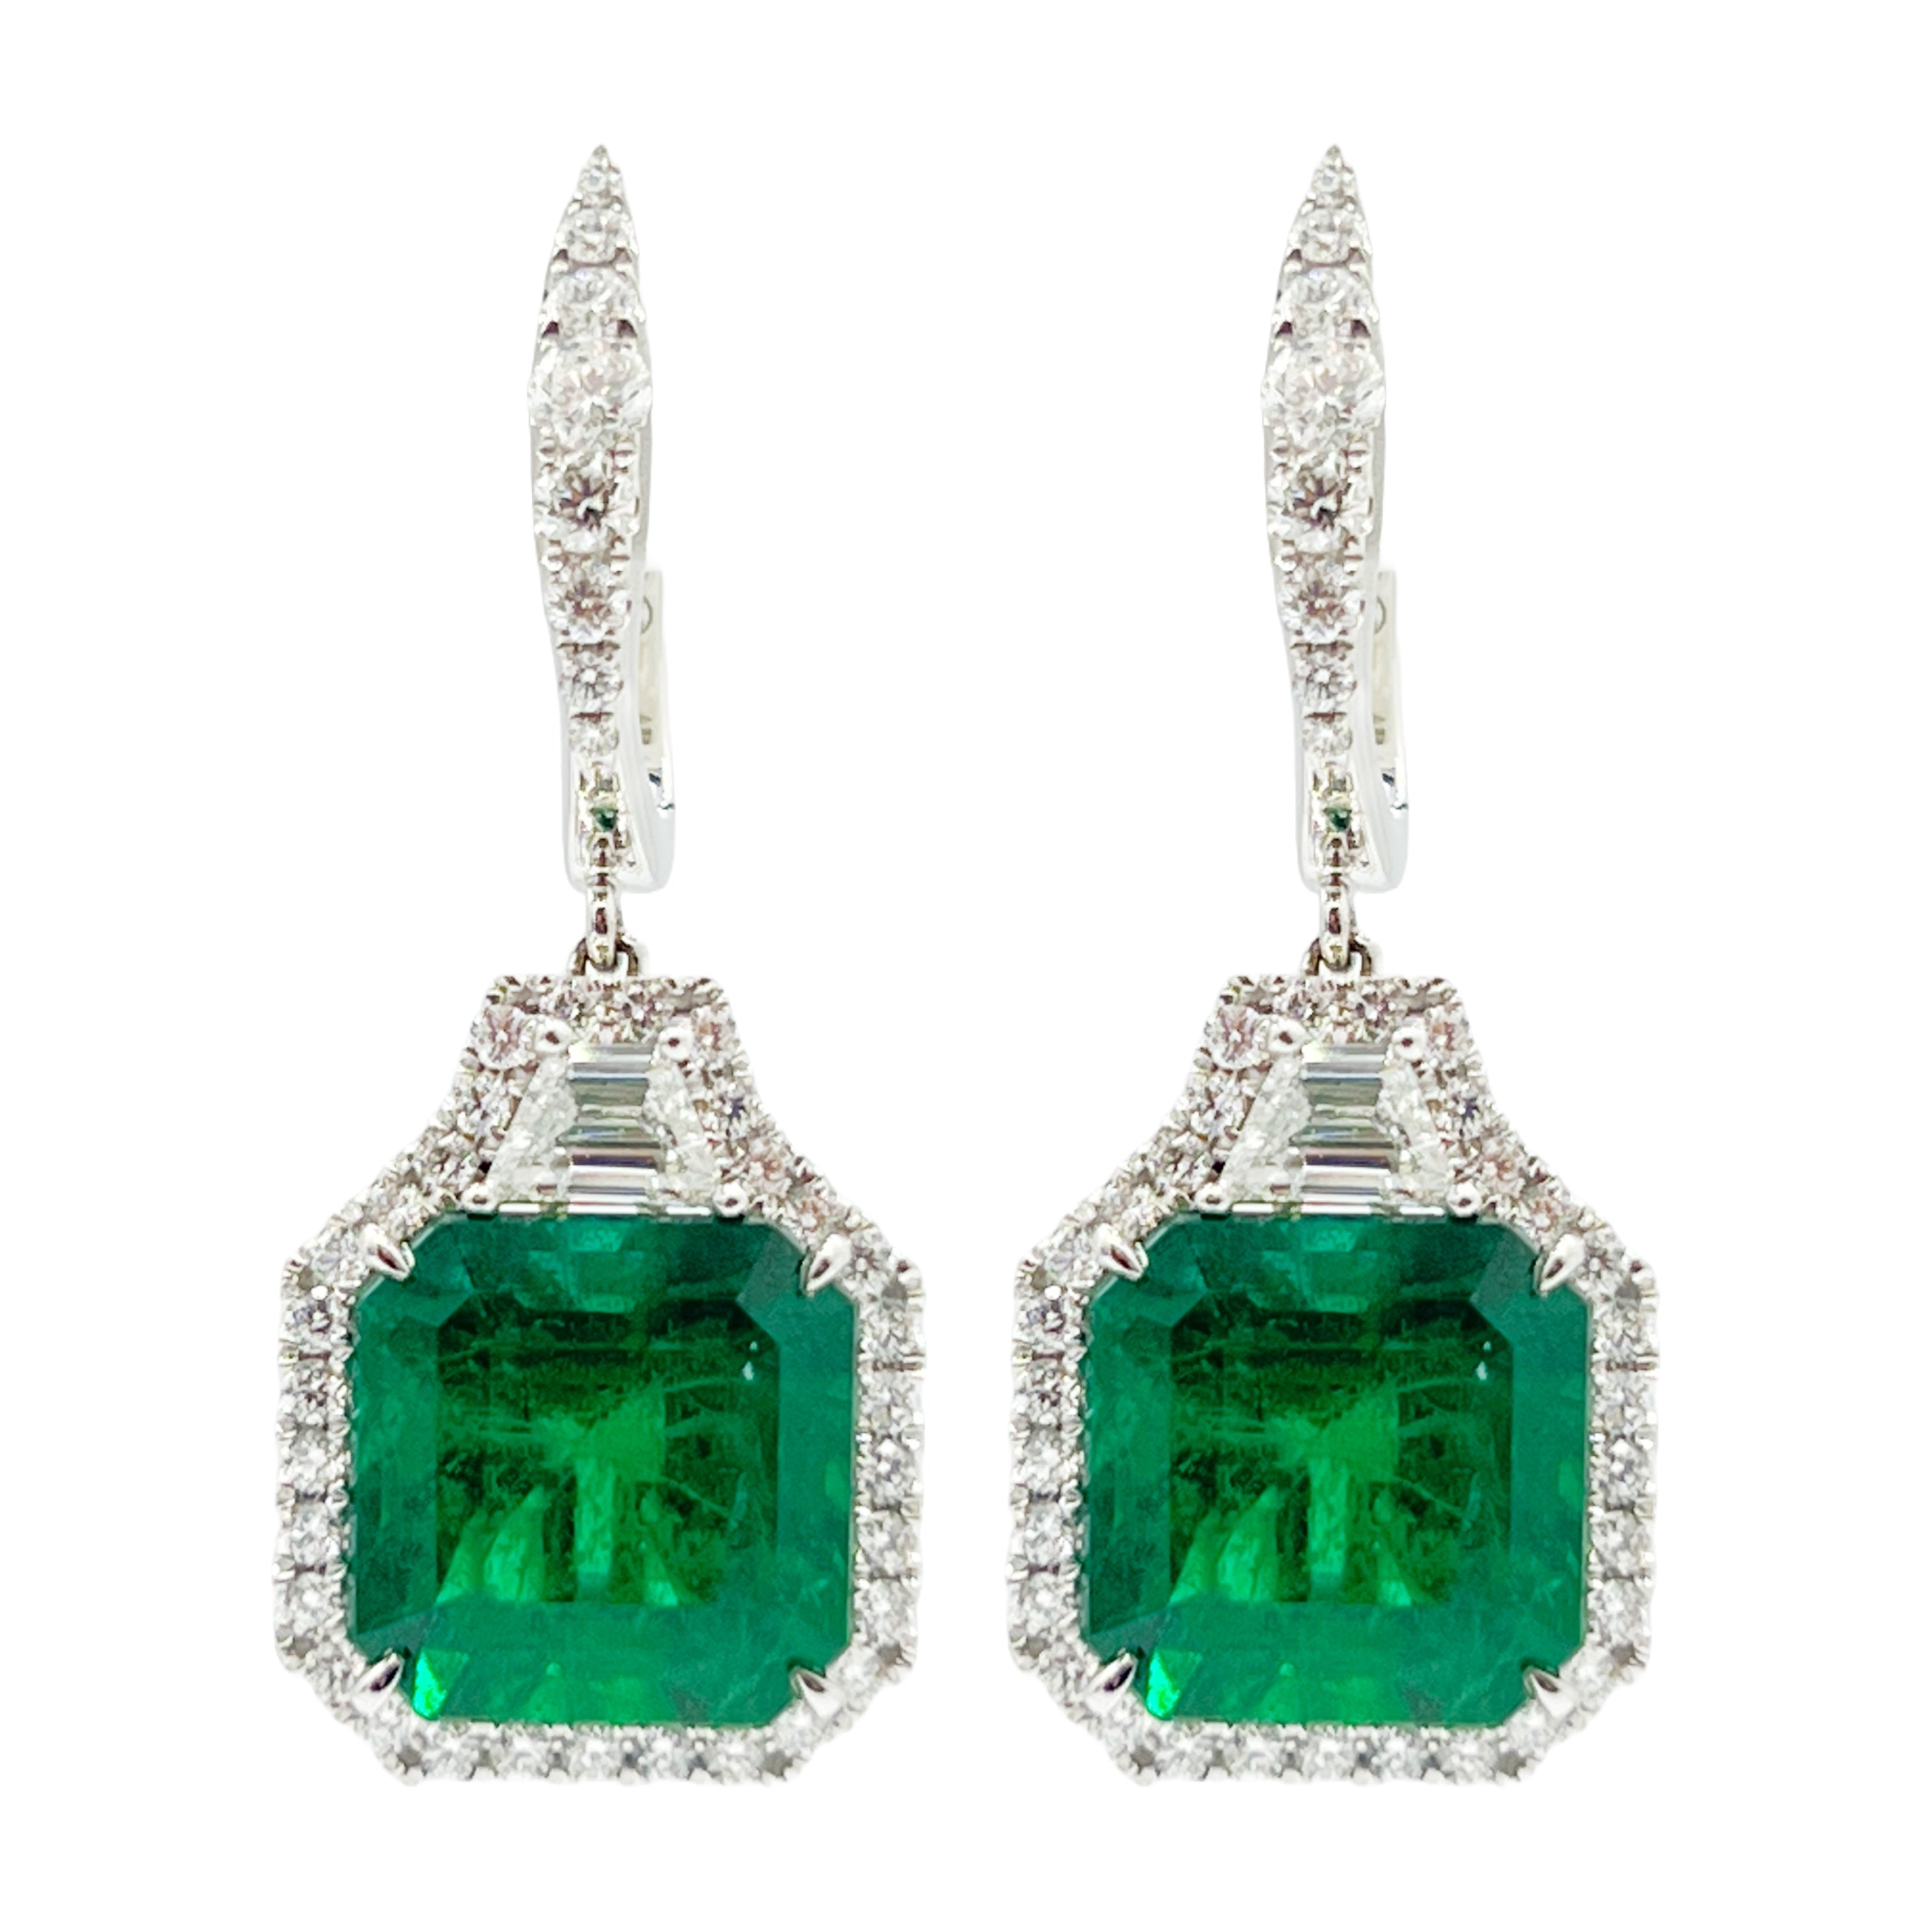 Earrings 18KW/7.8G 2EMER-18.16CT 2TRAP-0.87CT 62RD-0.83CT